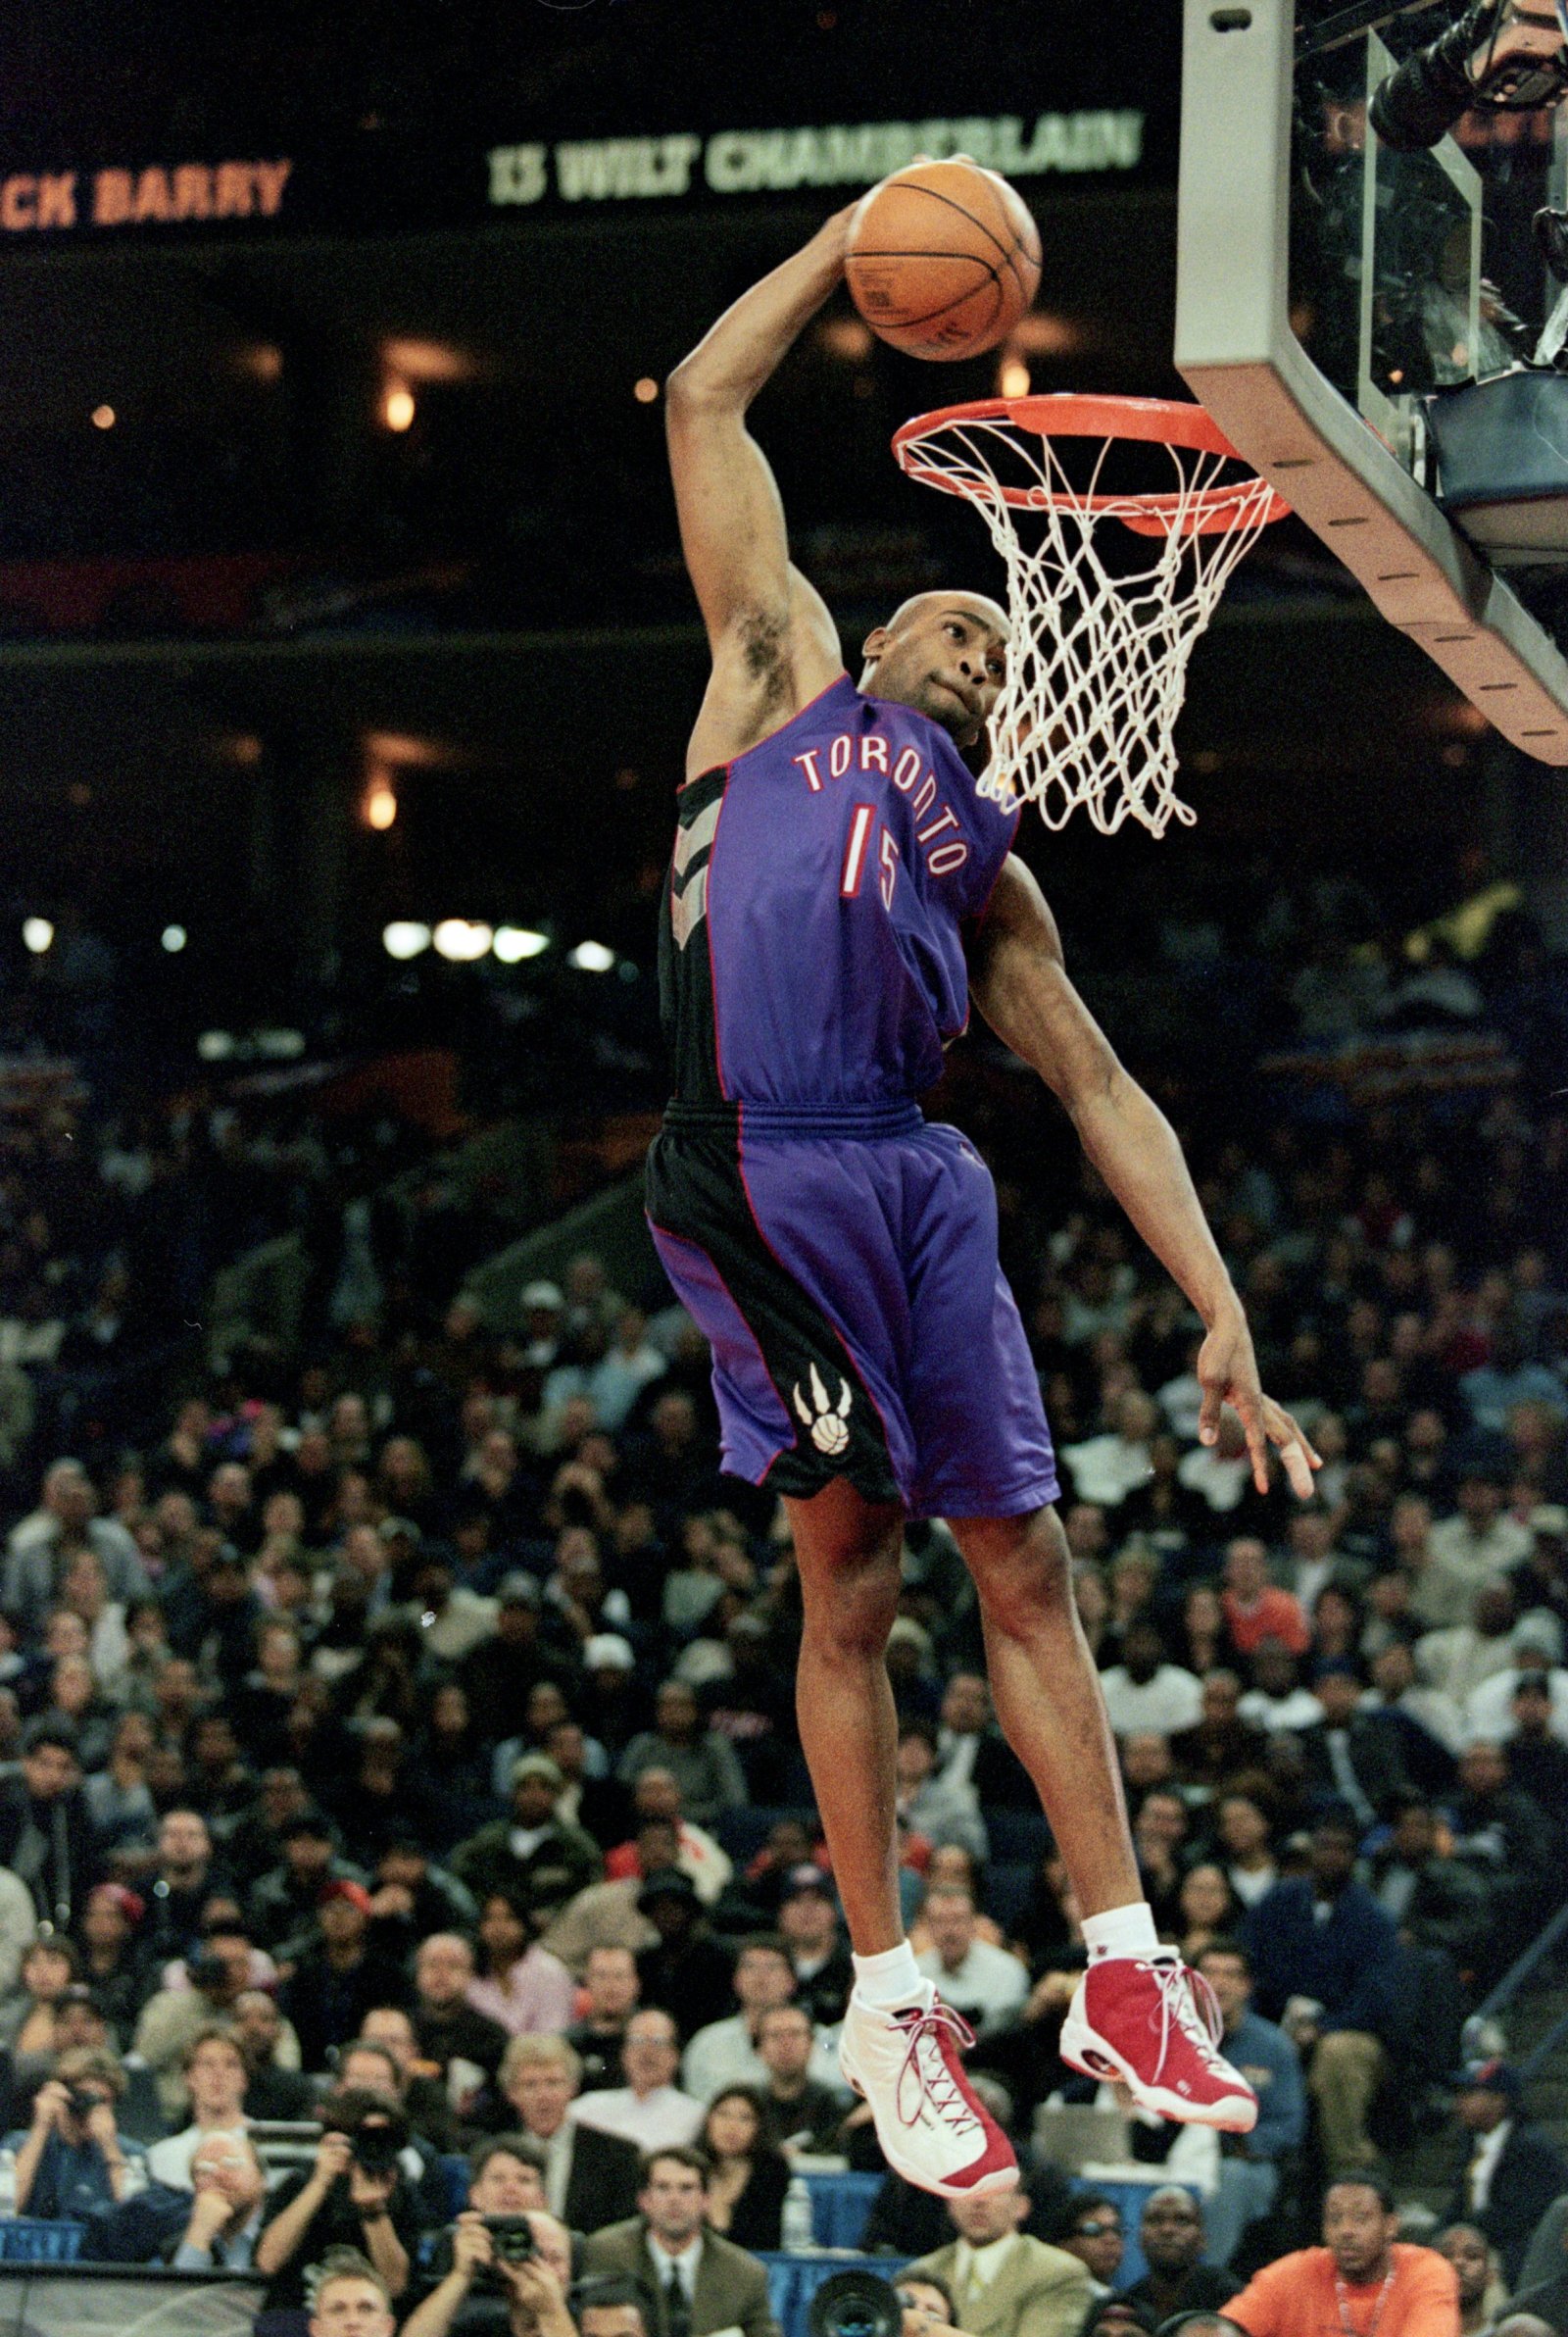 Vince Carter and the Slam Dunk's Day of Reckoning - The Atlantic